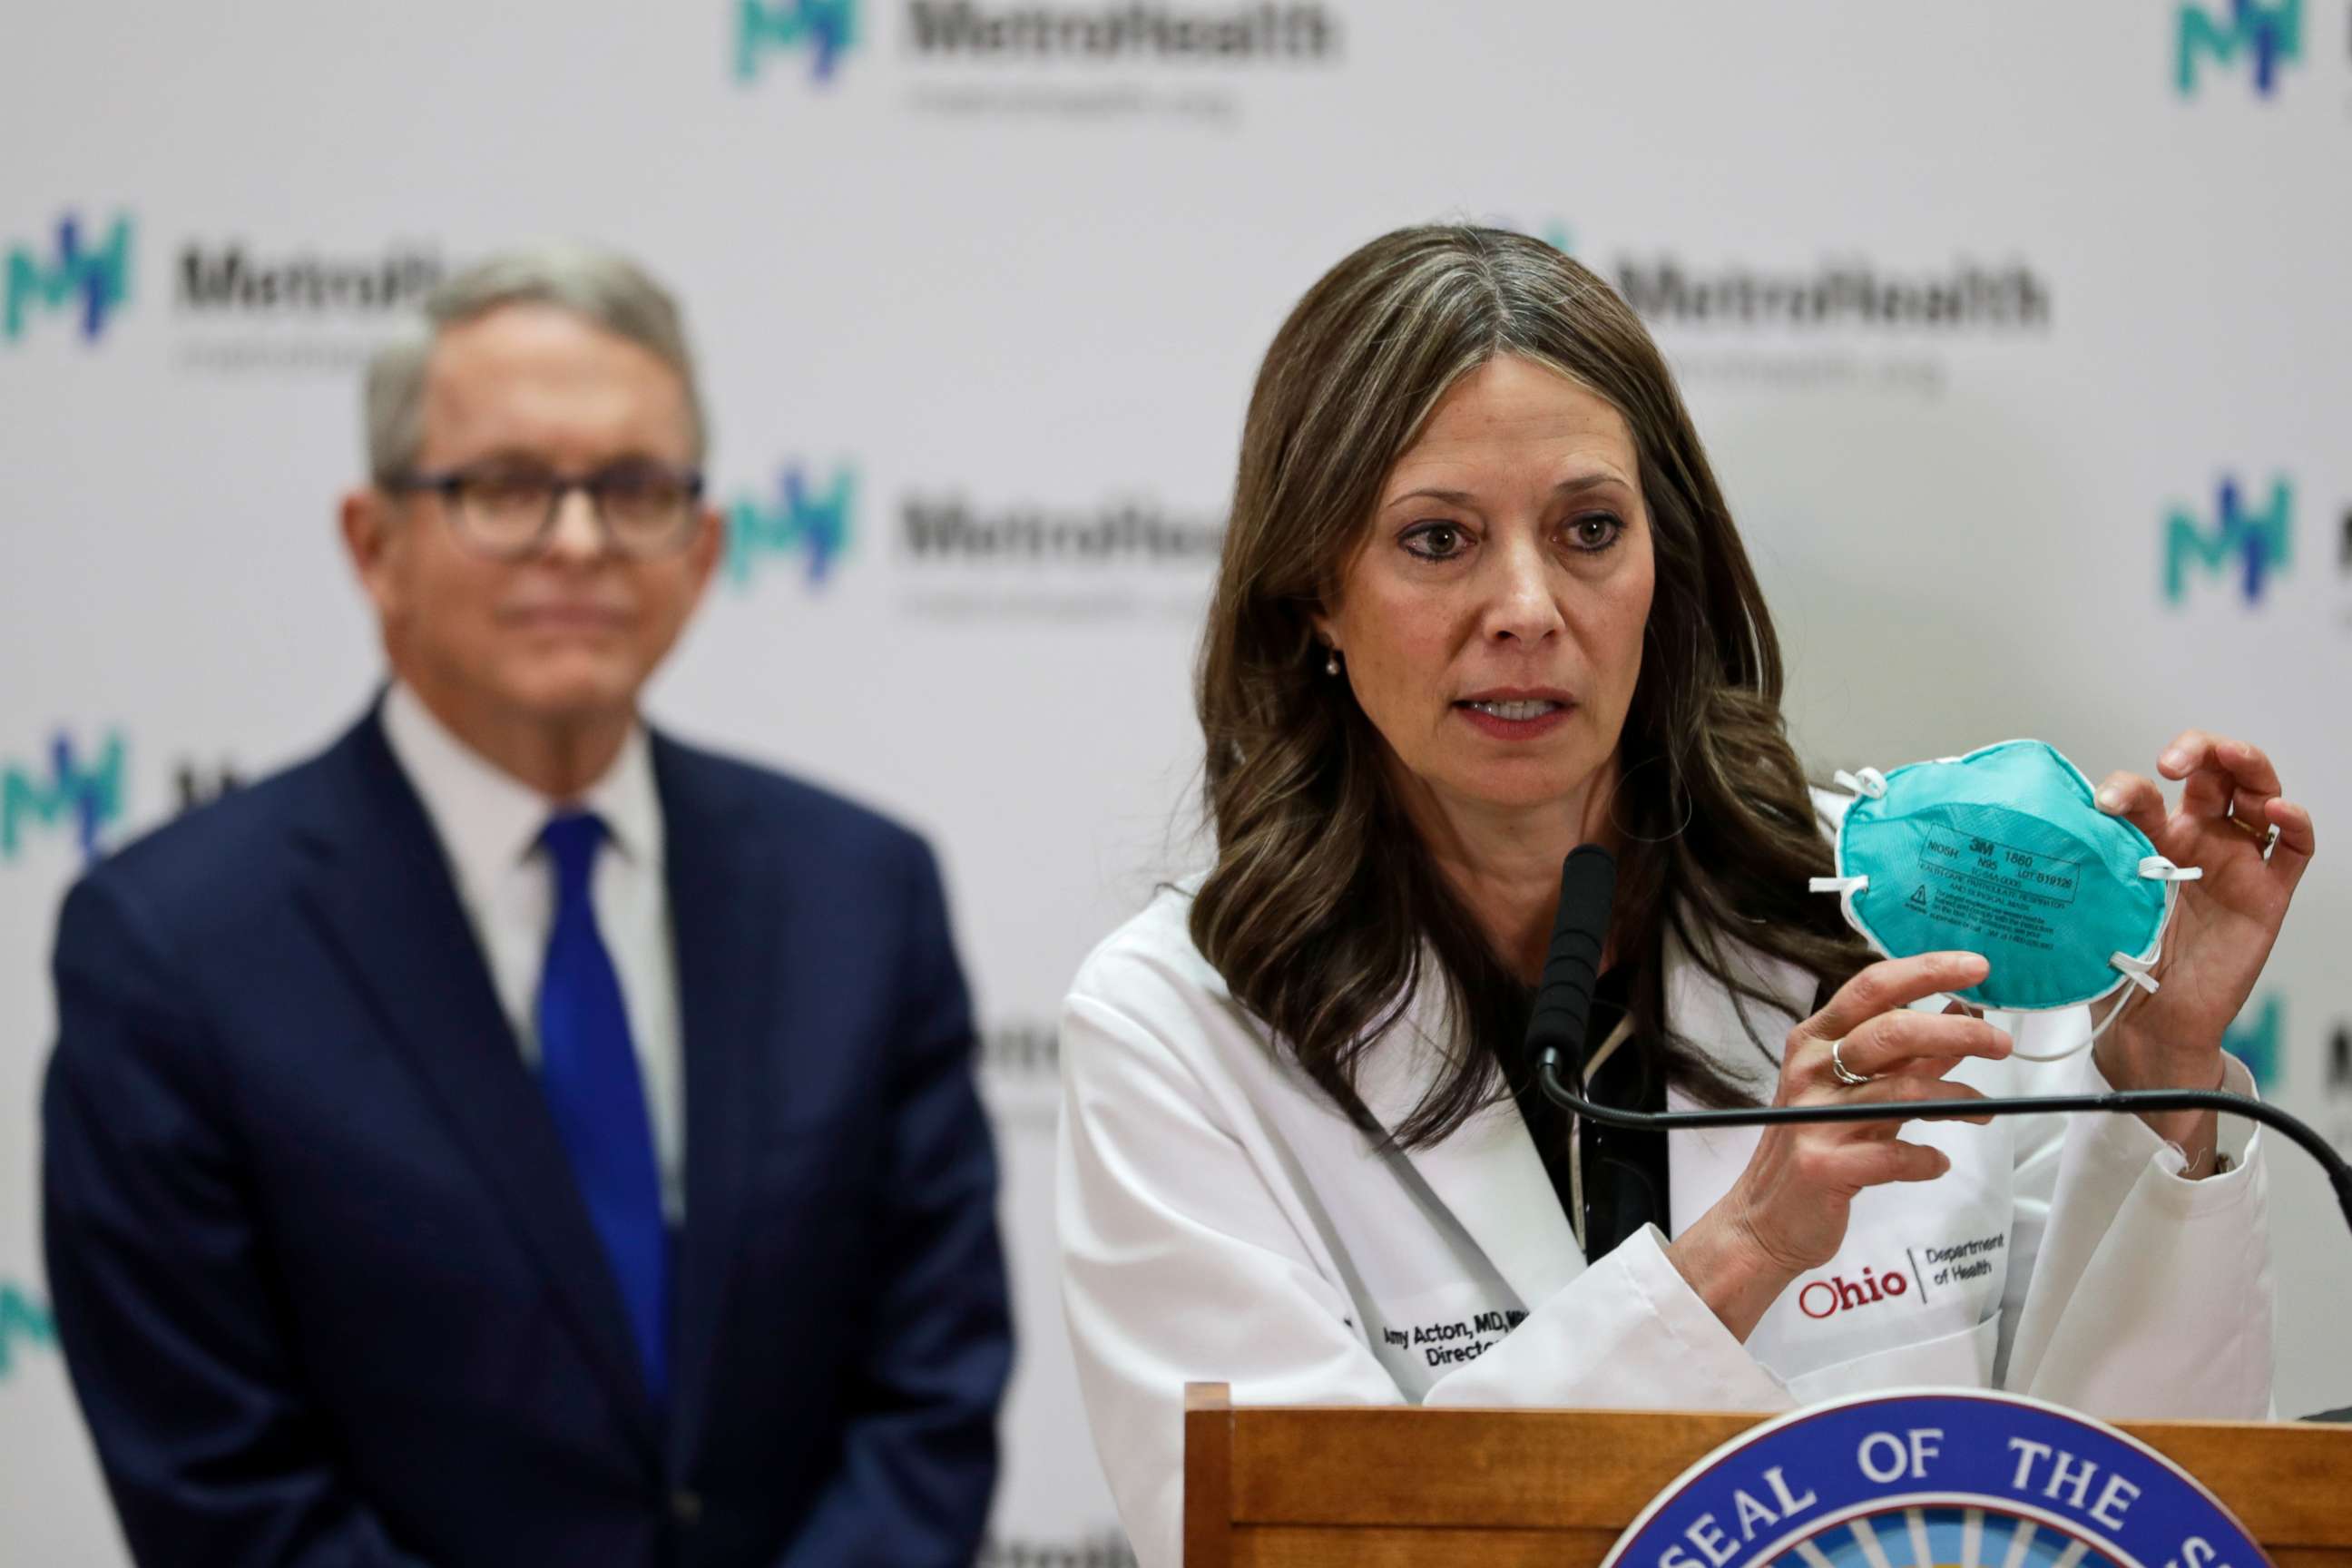 PHOTO: Ohio Department of Health Director Amy Acton speaks during a news conference at the MetroHealth Medical Center in Cleveland while Ohio Gov. Mike DeWine watches, Feb. 27, 2020.